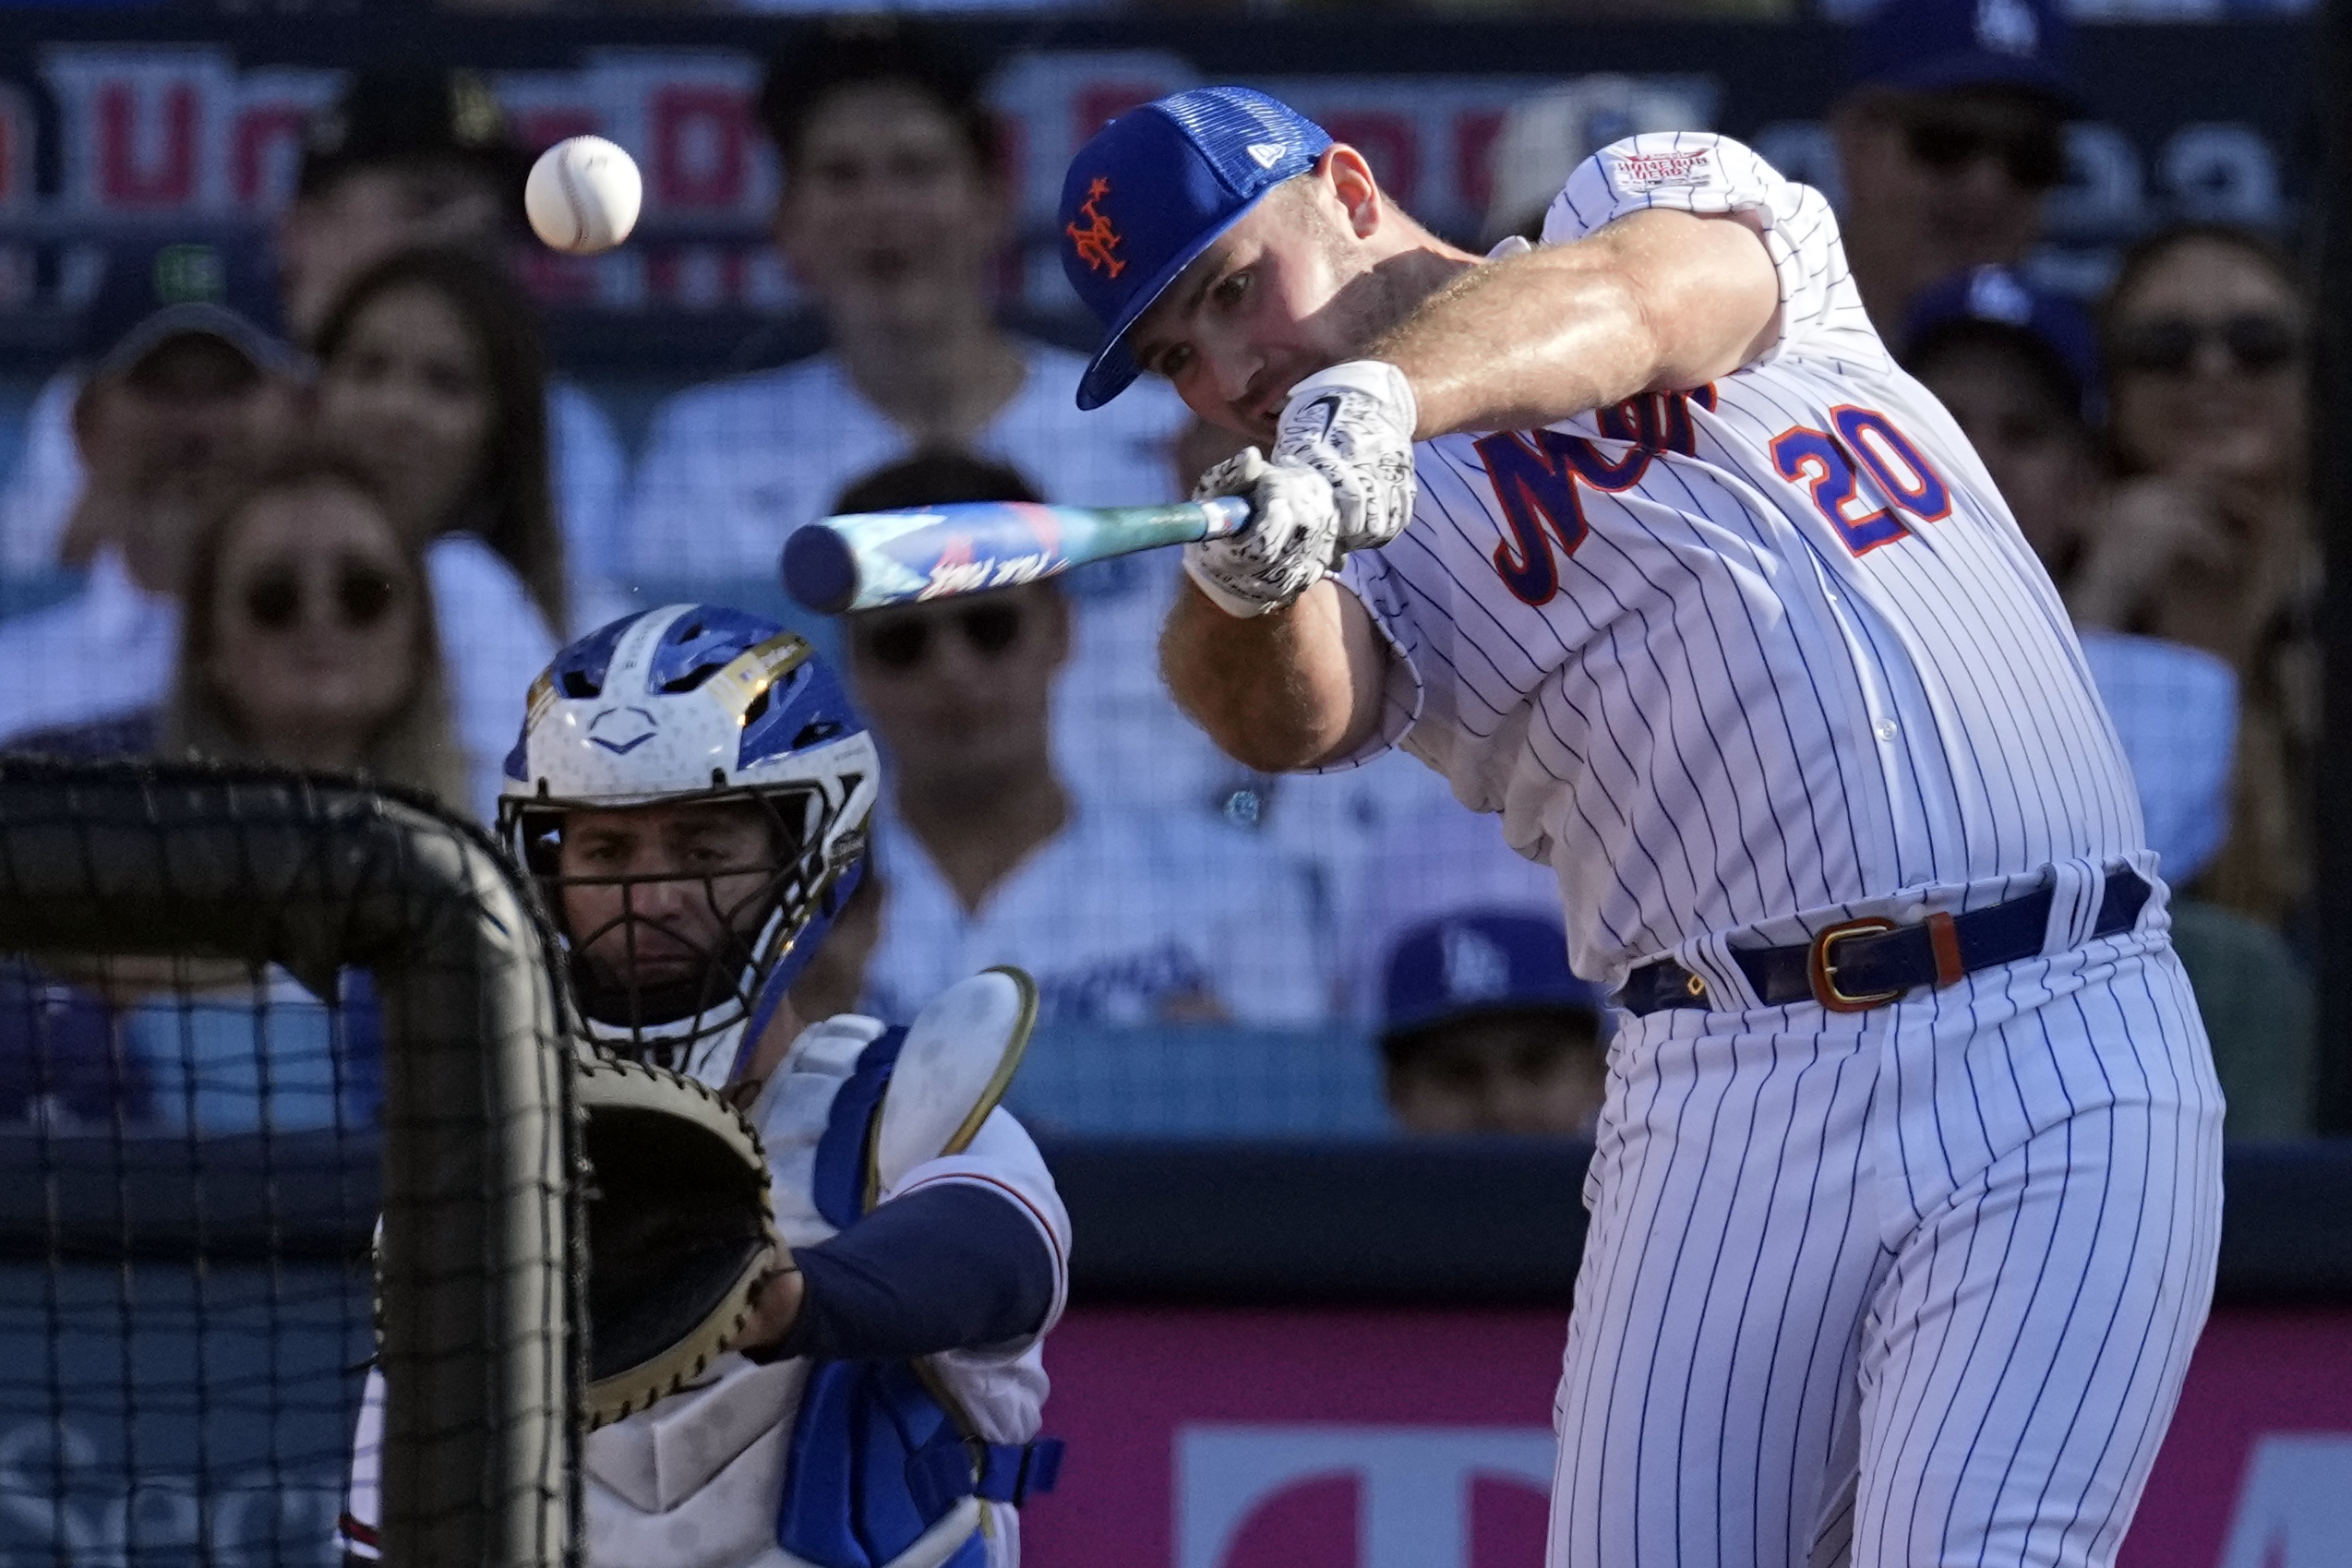 Home Run Derby: Pete Alonso Tells ESPN his 10 steps to winning